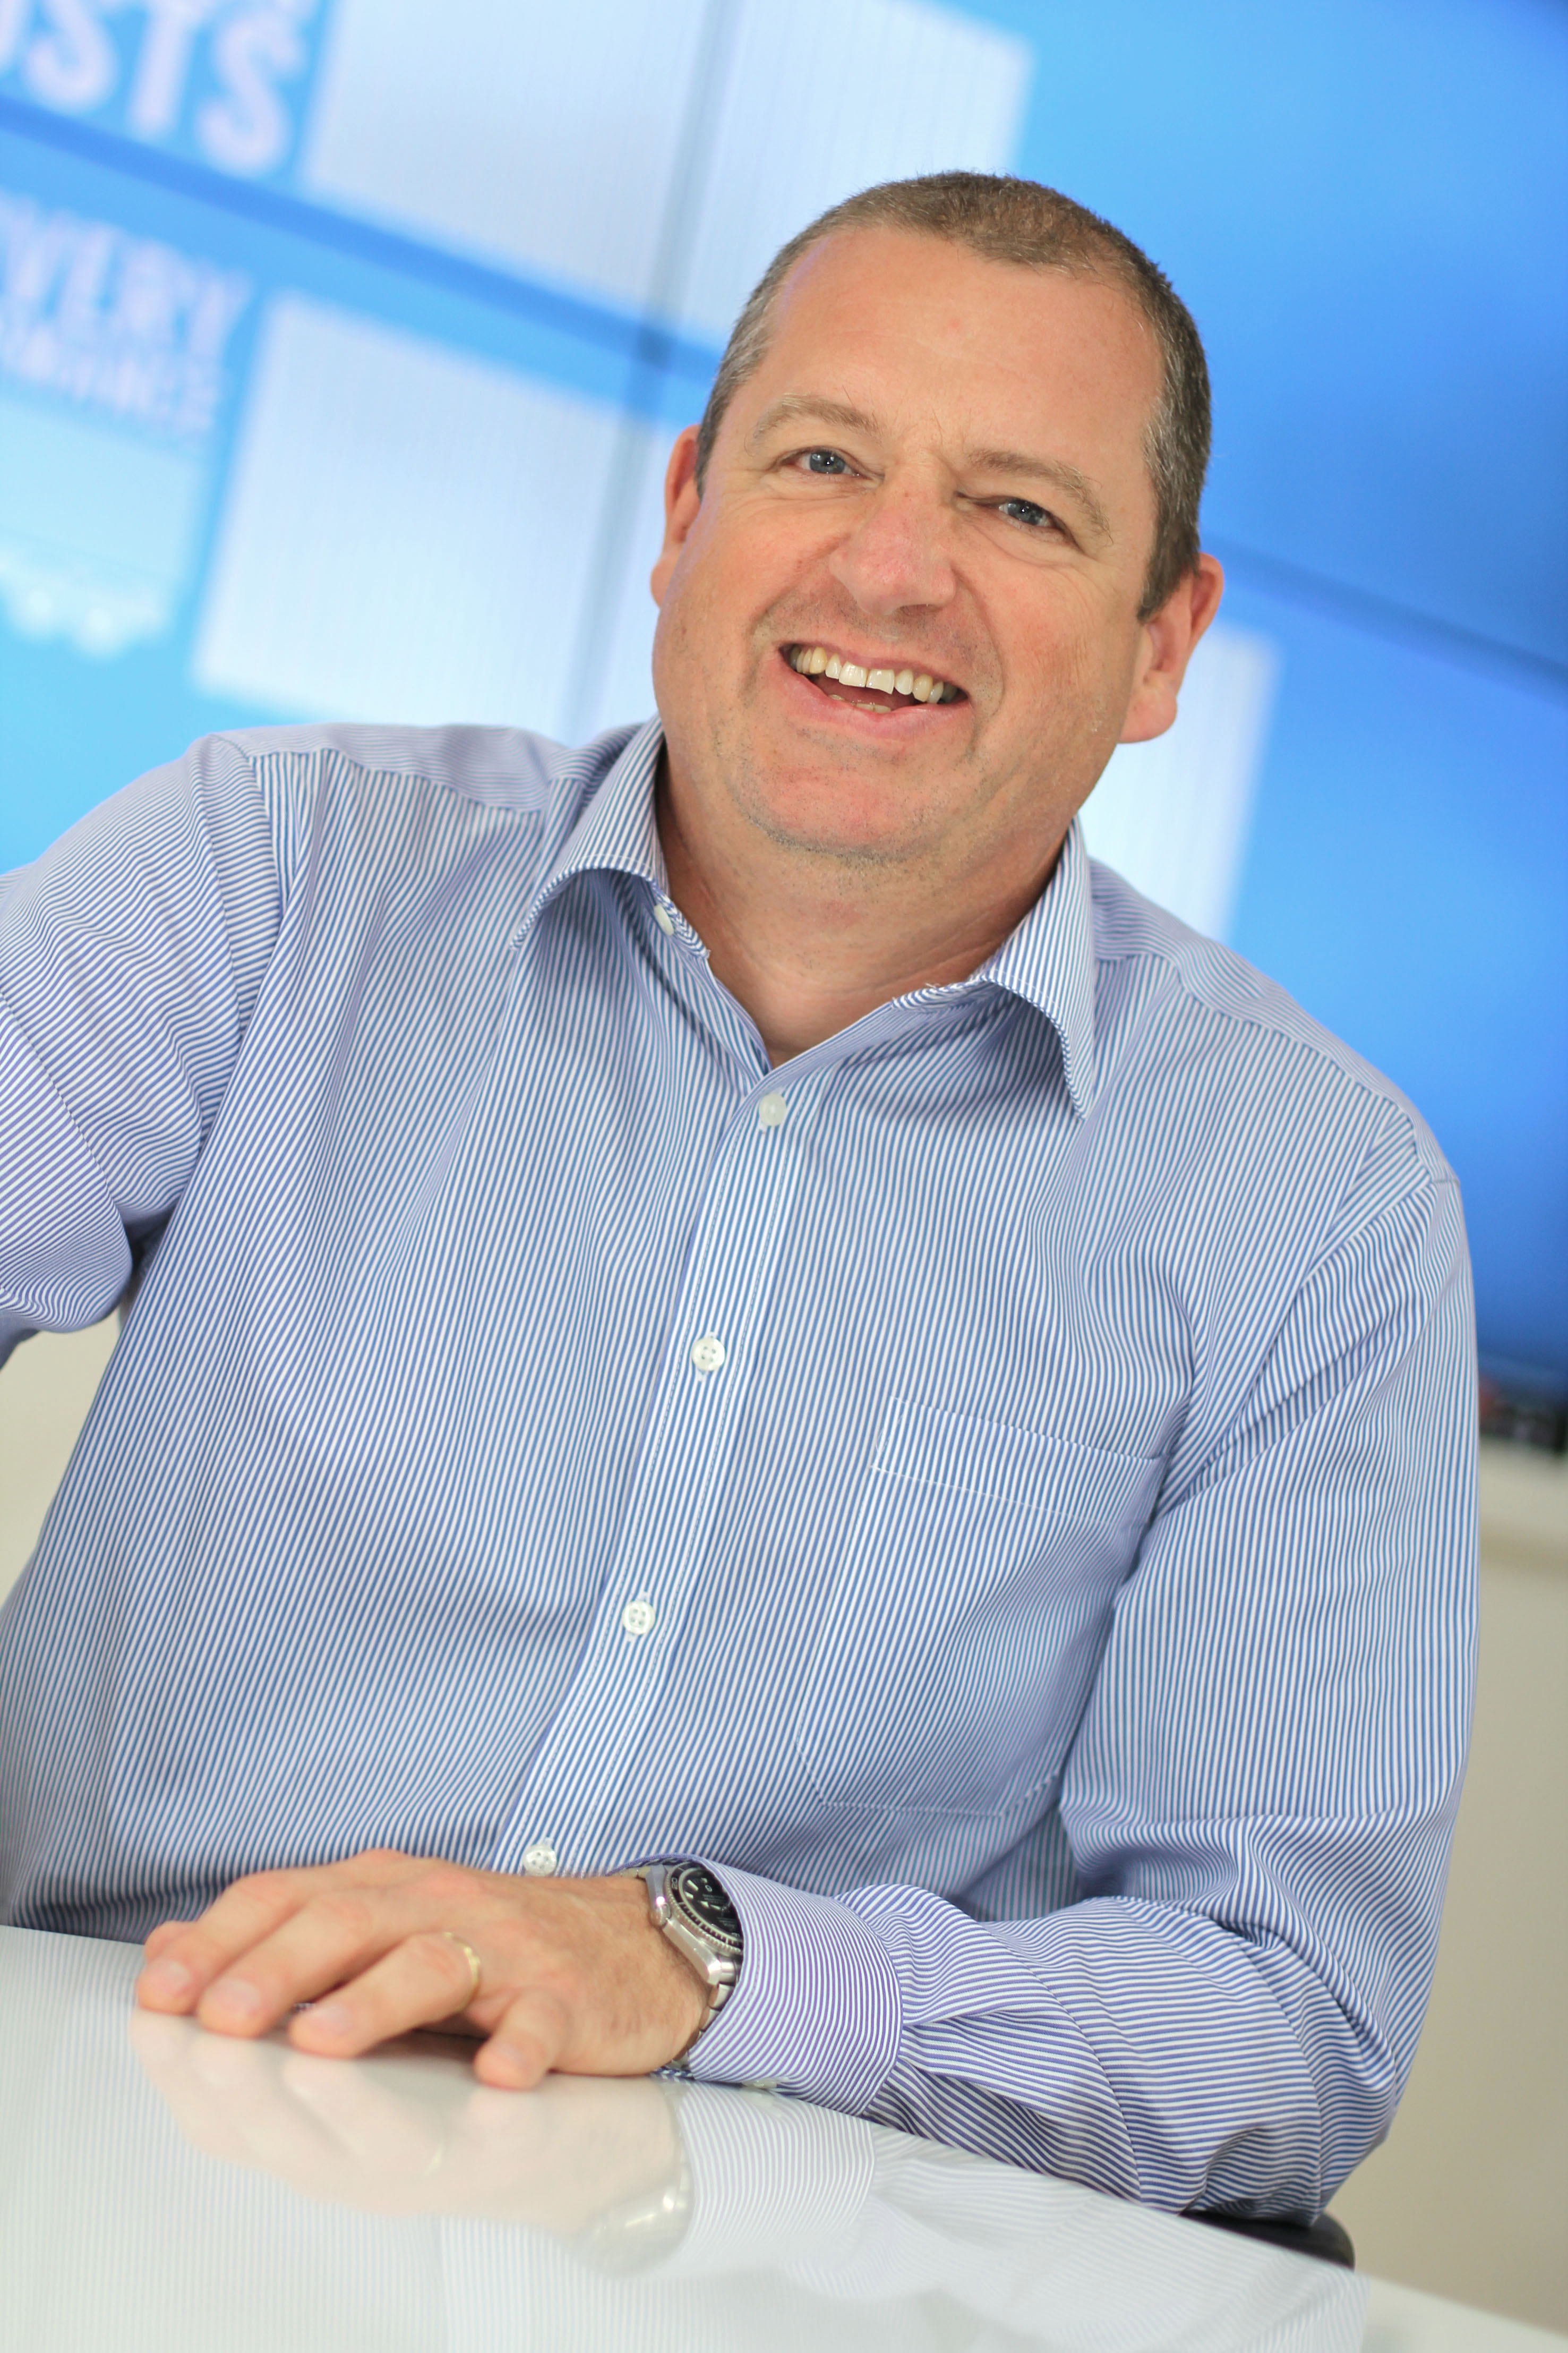 William Salter, Managing Director of Paragon Software Systems, leading routing and scheduling software provider